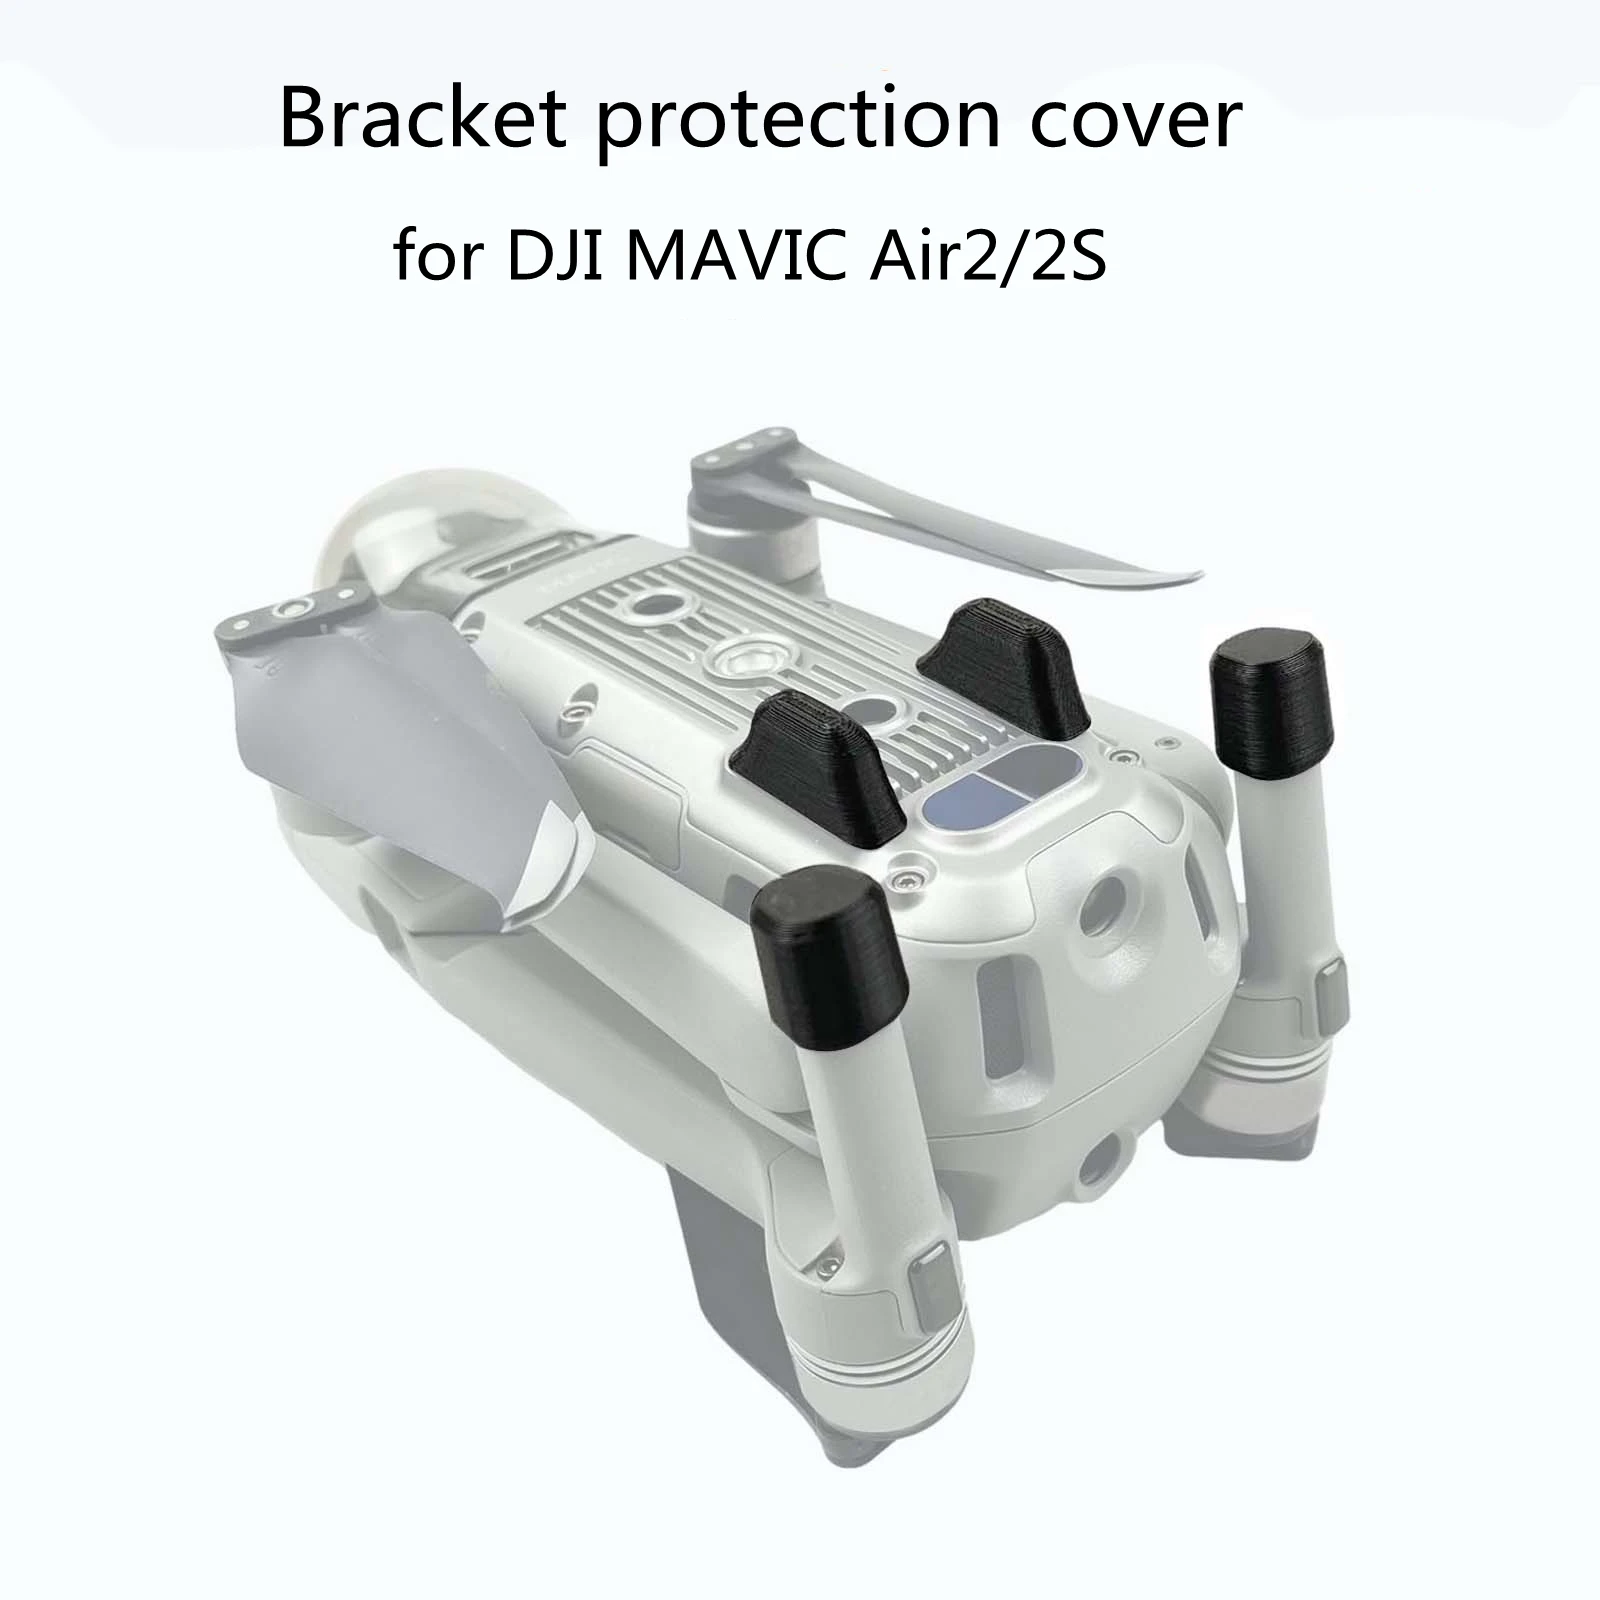 

Tripod To Protect The Heightening Bracket Wear And Tear Surround The Pad Suitable For DJI MAVIC AIR 2/2S Drone Accessories